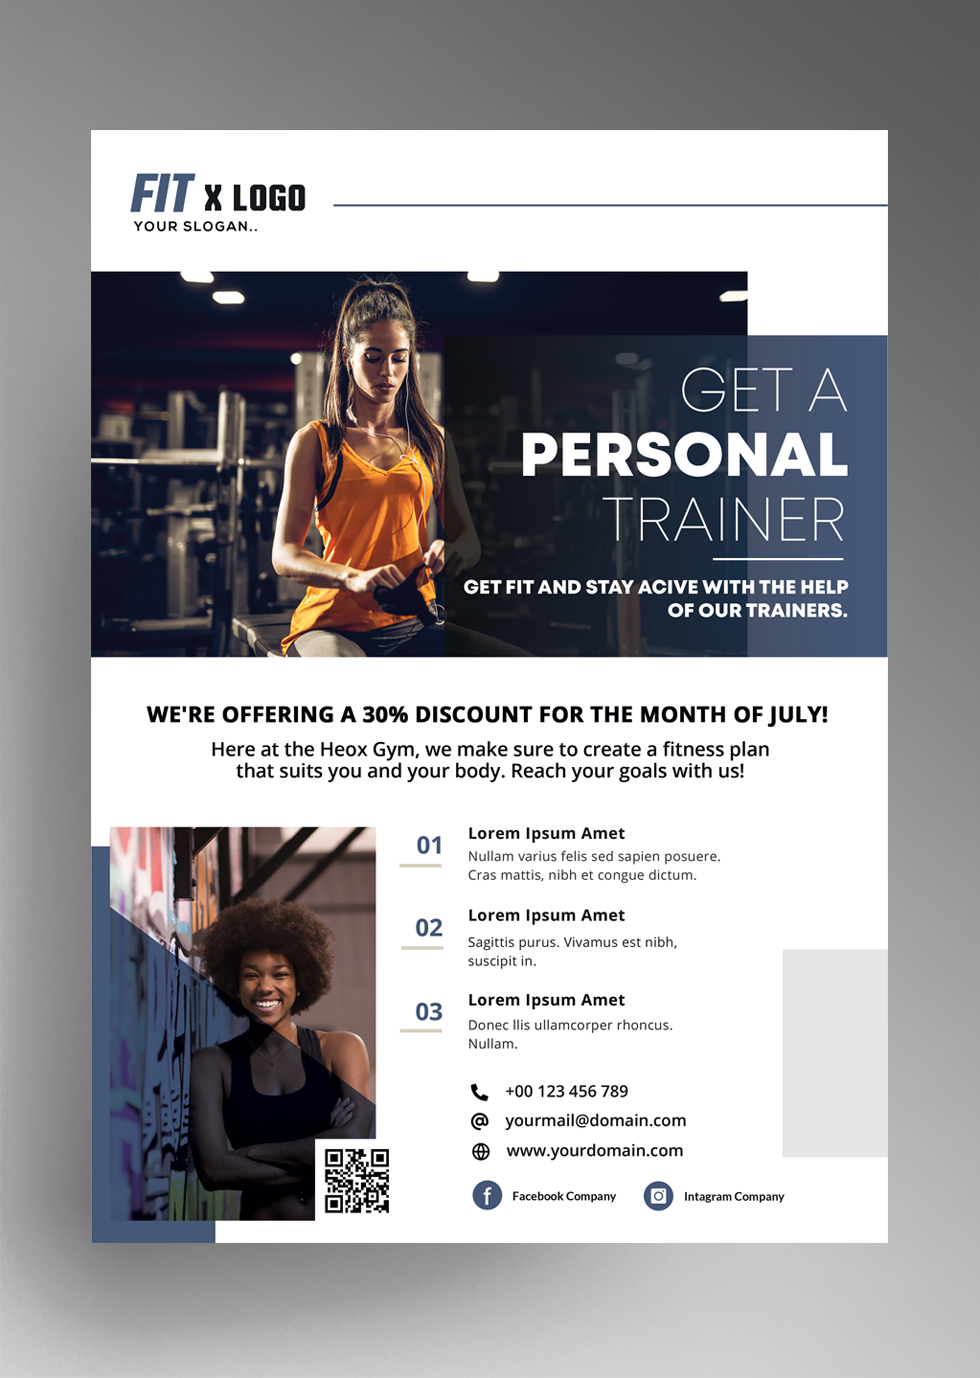 Personal Trainer Free Fitness PSD Flyer Template by pixelsdesign